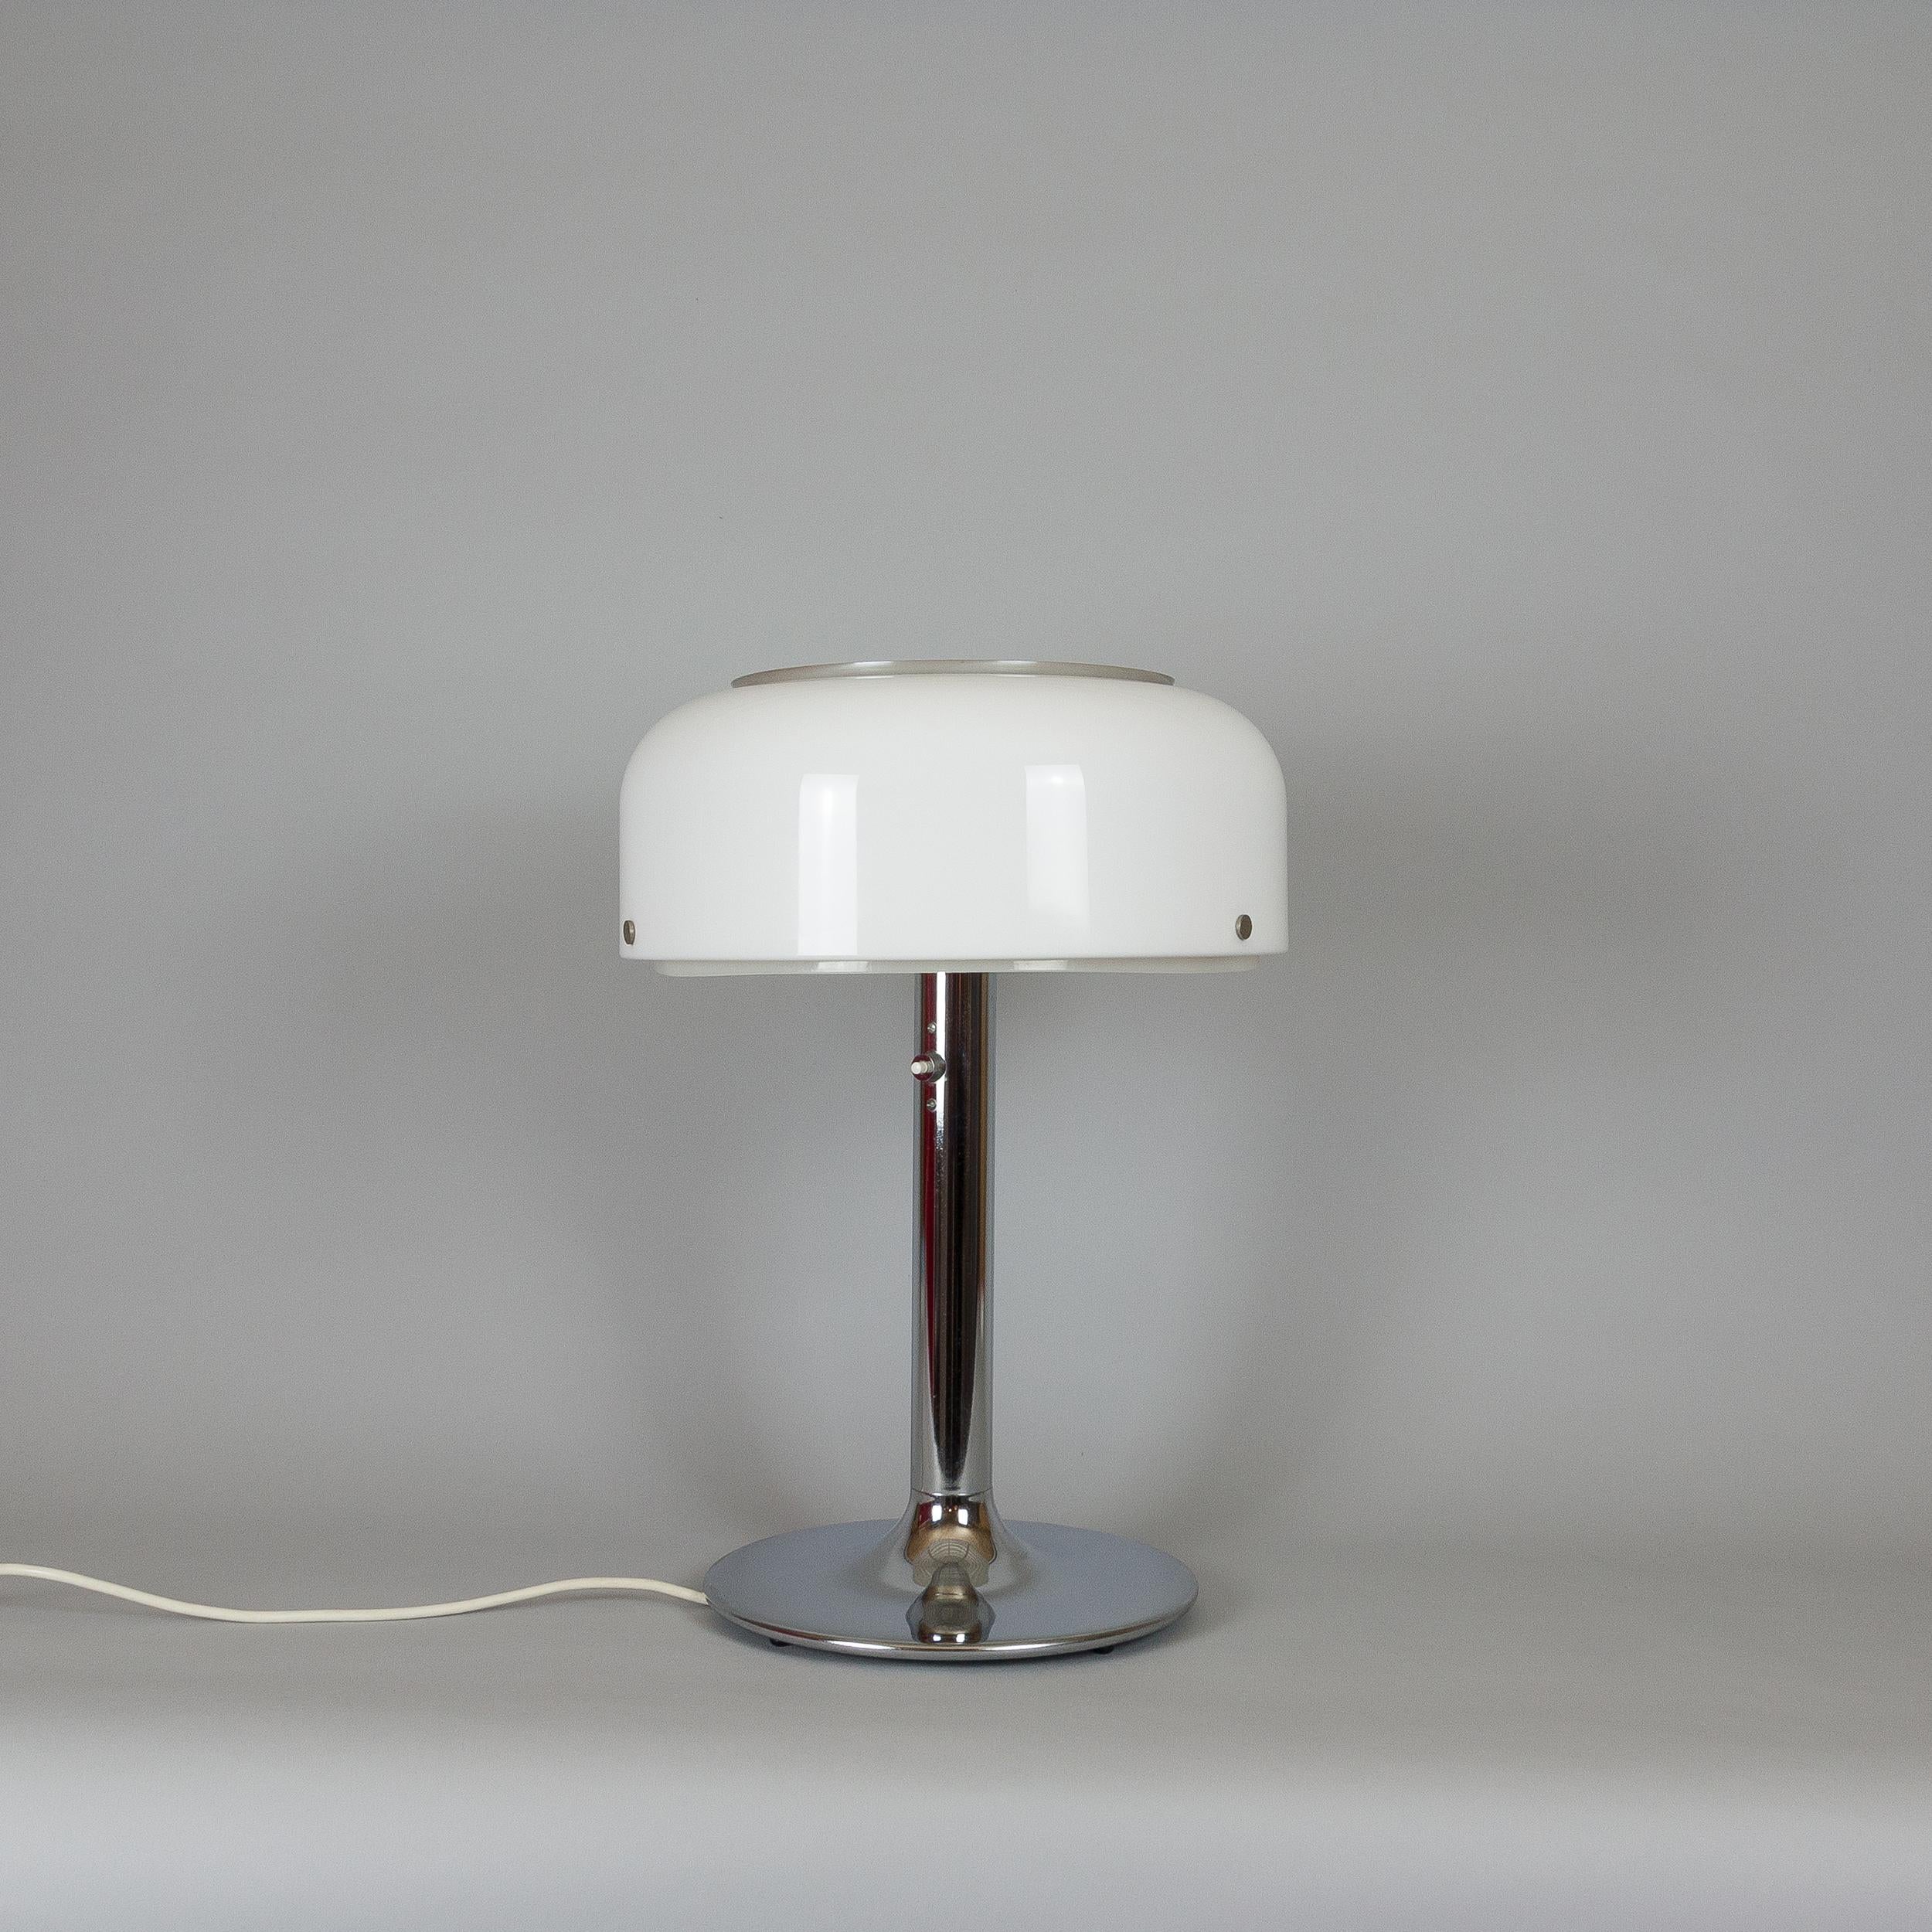 Knubbling table lamp by Anders Pehrson for Ateljé Lyktan. Chrome and acrylic. Very good condition with some slight signs of age to the chrome. 1960s. PAT tested.